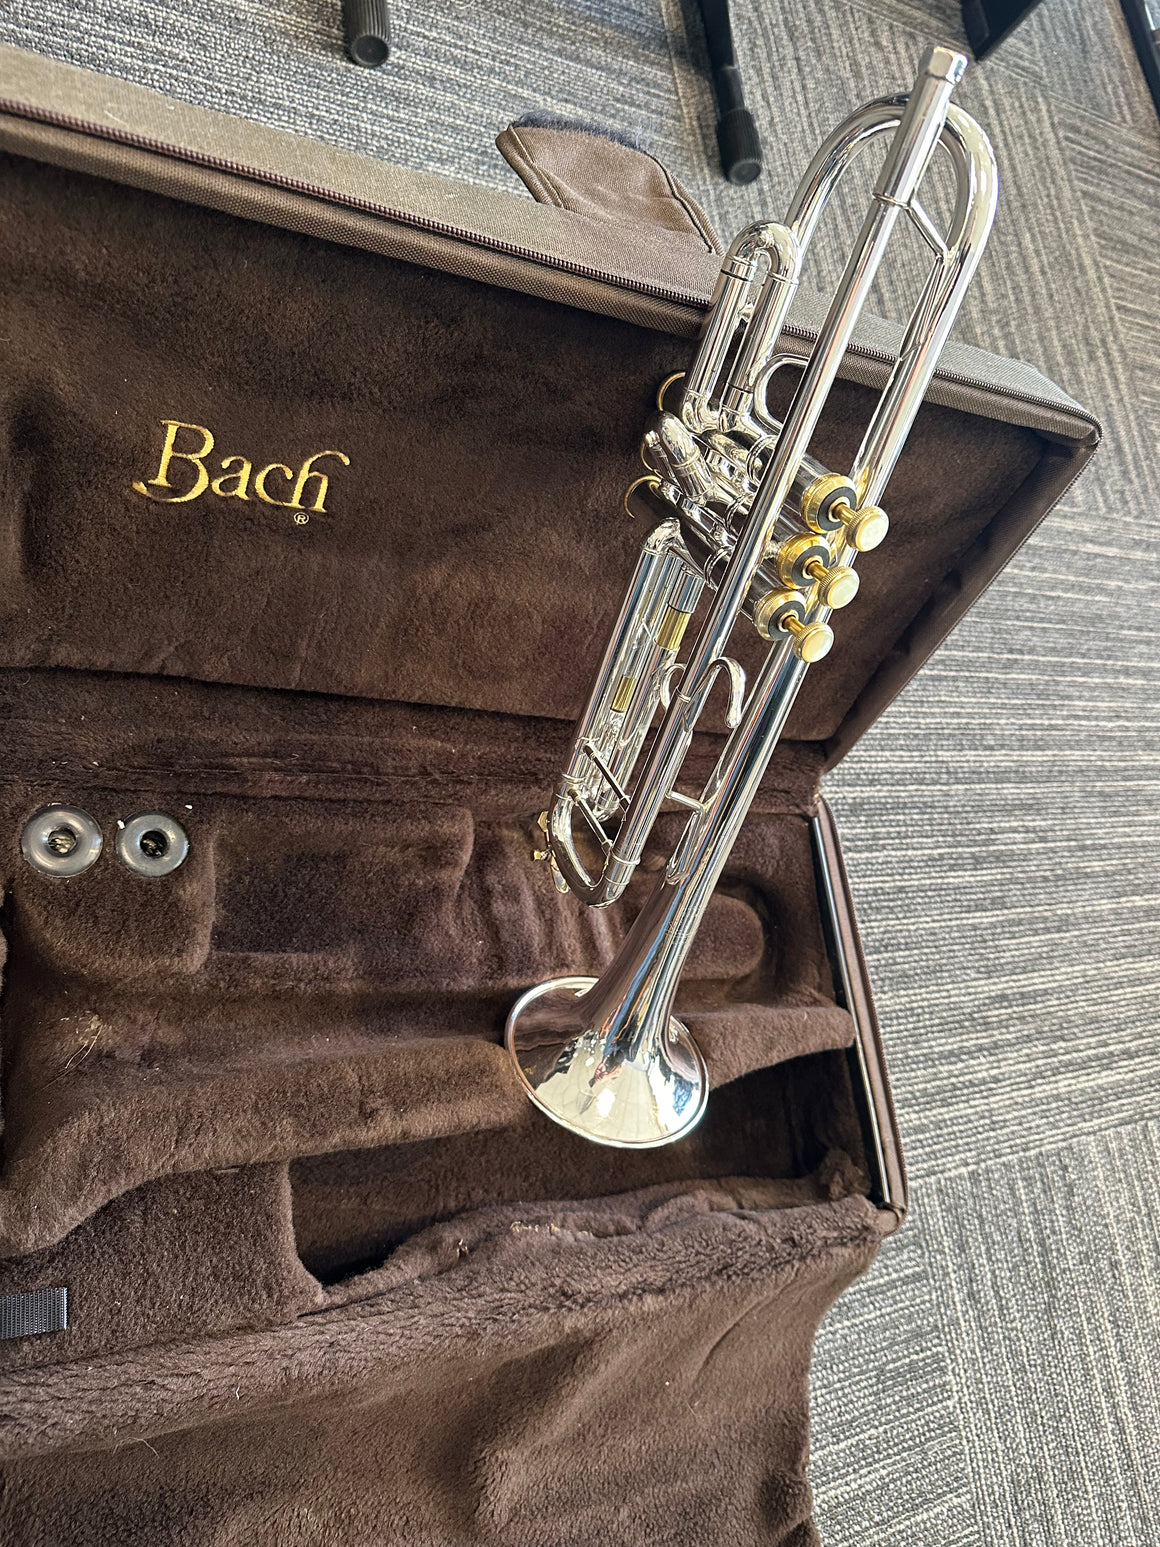 Used Bach Strad - 180S72